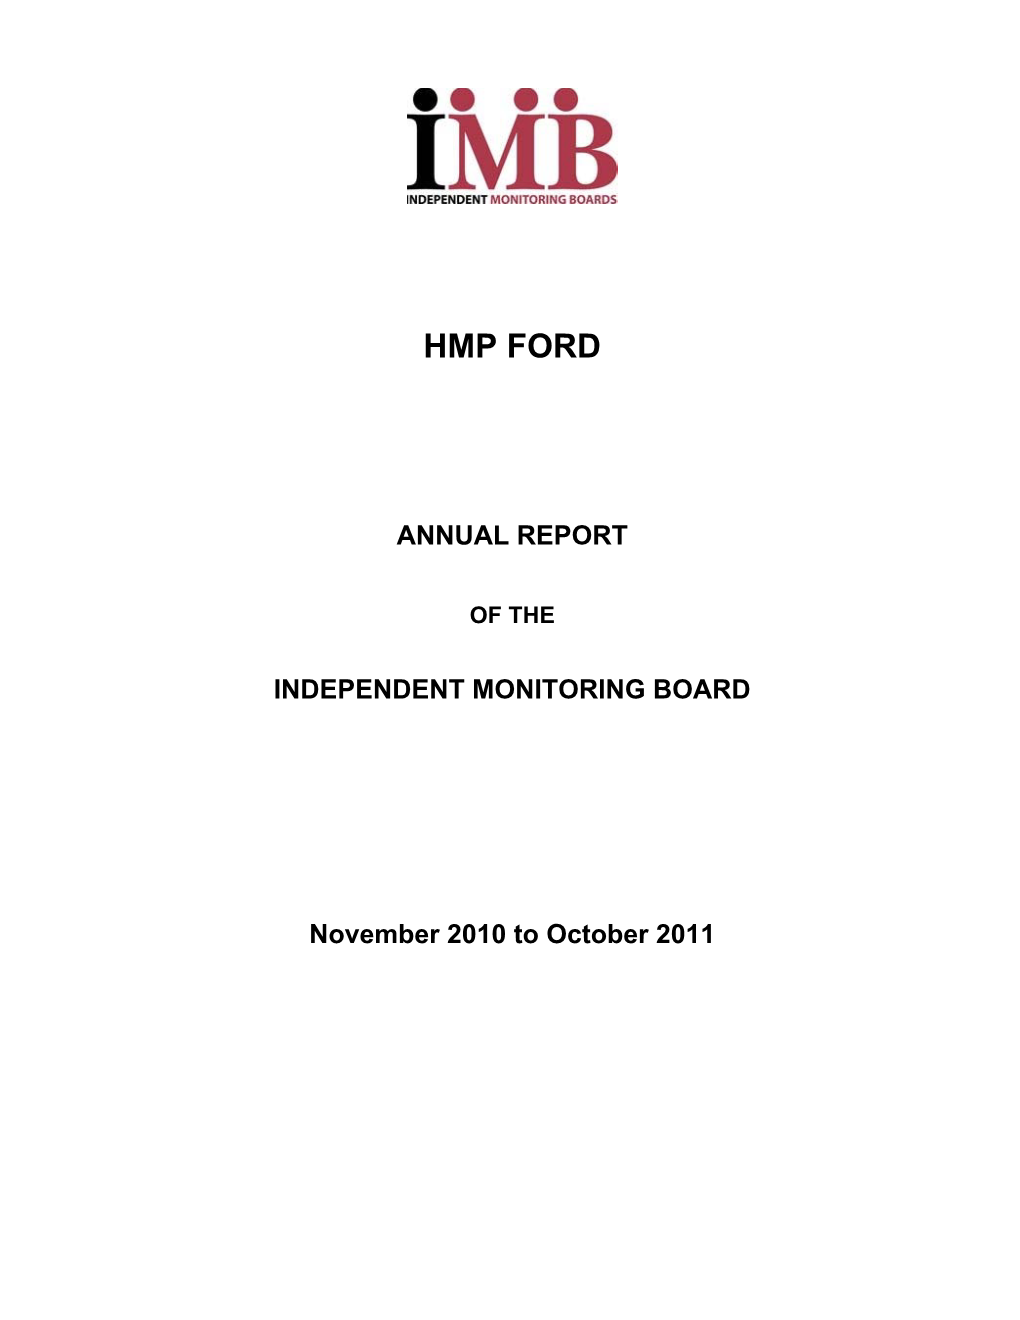 Independent Monitoring Board Annual Report Forhmp Ford 2010-11